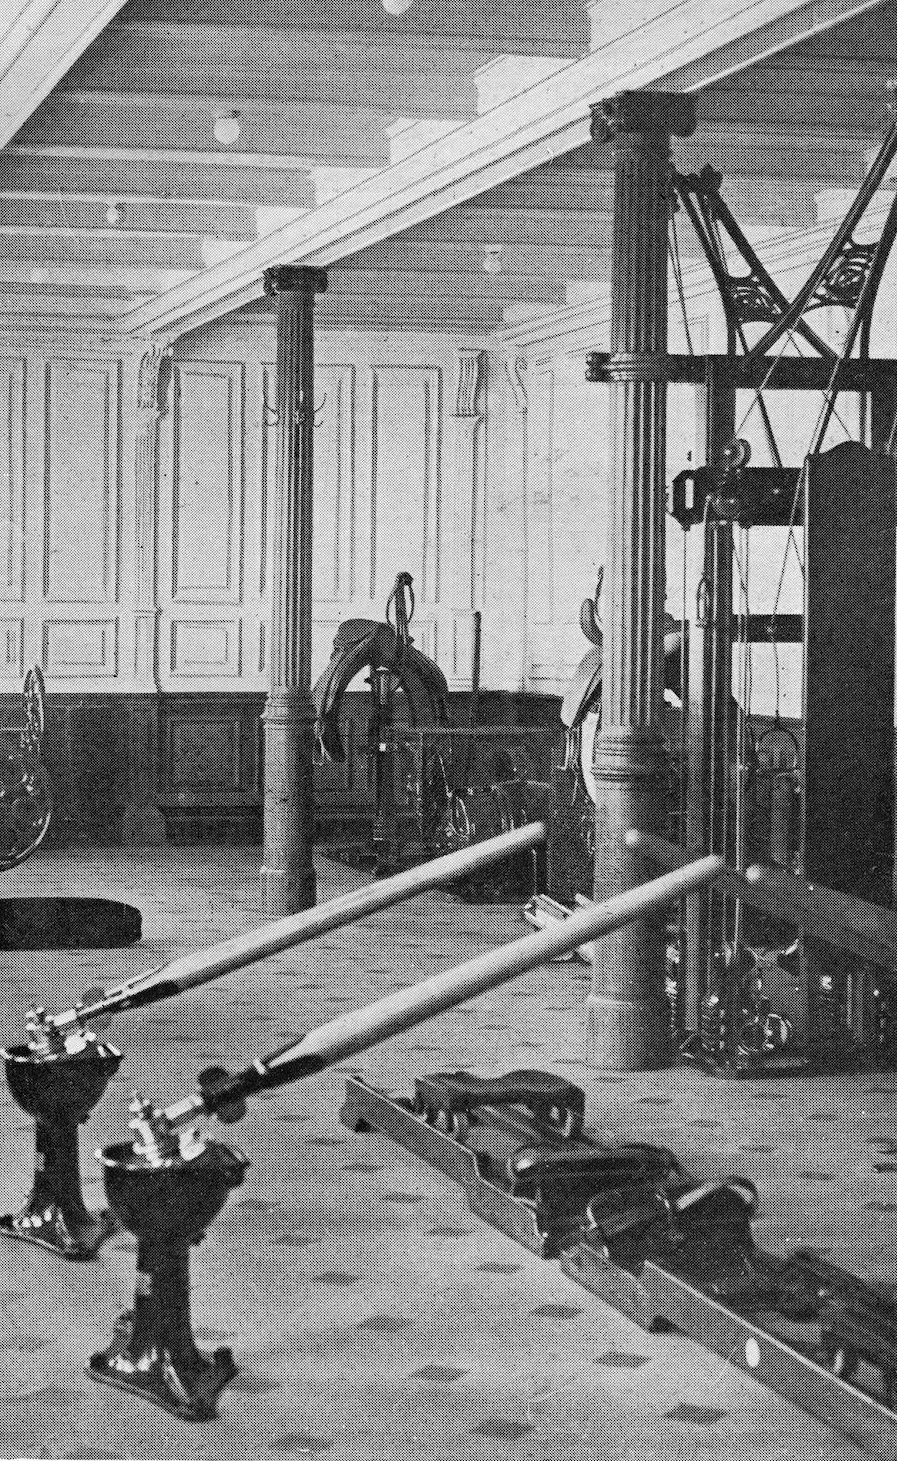 The gymnasium on the Titanic. Passengers could ride on a mechanical saddle or exercise "as if in a racing skiff.1912